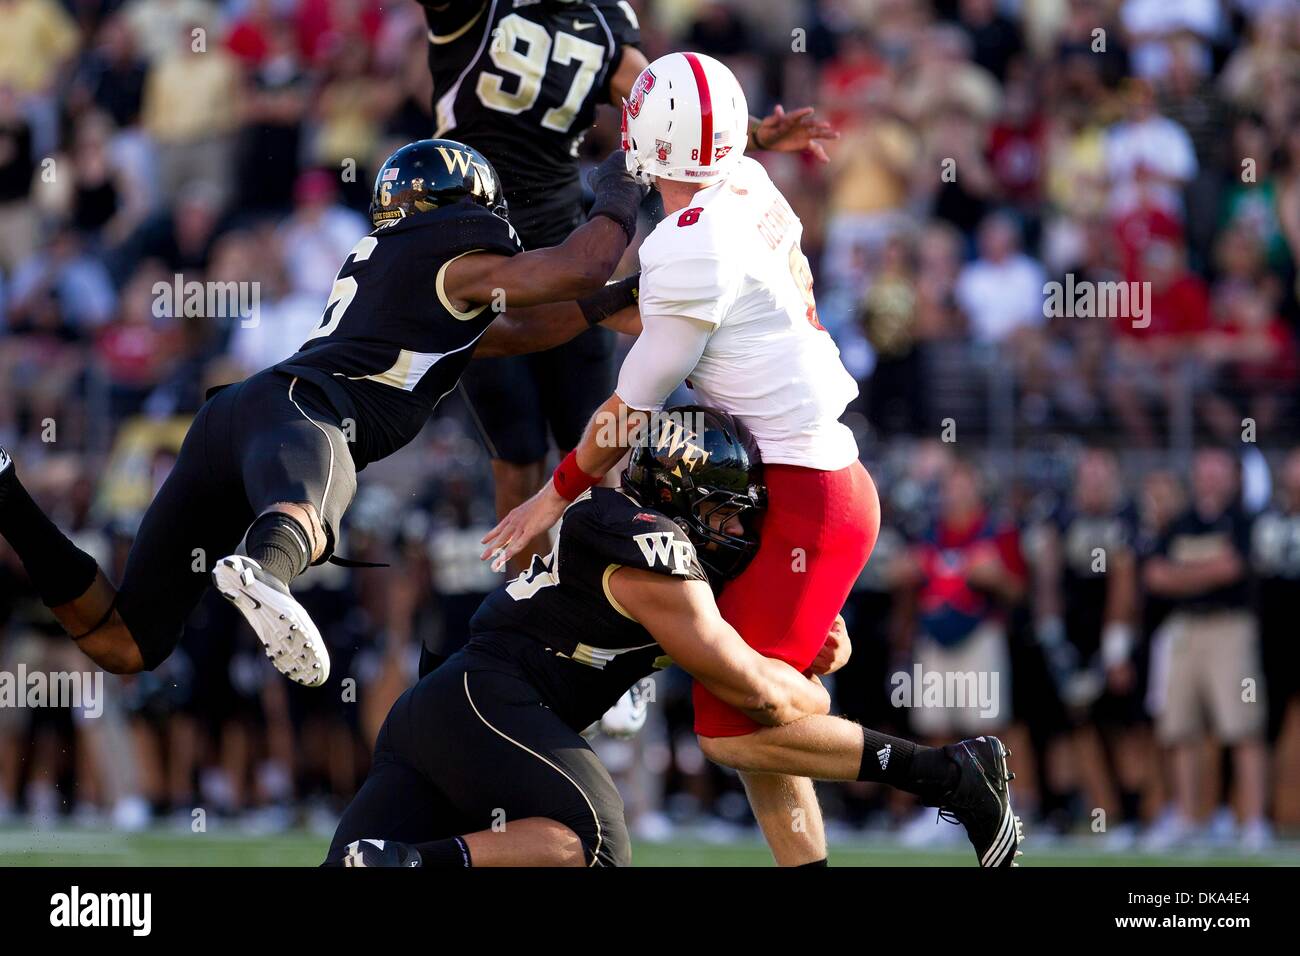 Sept. 10, 2011 - Winston-Salem, North Carolina, U.S - Wake Forest Demon Deacons cornerback Kenny Okoro (6) and North Carolina State Wolfpack linebacker Calvin Forbes (50) hit North Carolina State Wolfpack quarterback Mike Glennon (8) just after a touchdown throw during the Wake Forest vs. NC State football game.  Wake Forest defeats NC State 34-27. (Credit Image: © Tony Brown/South Stock Photo